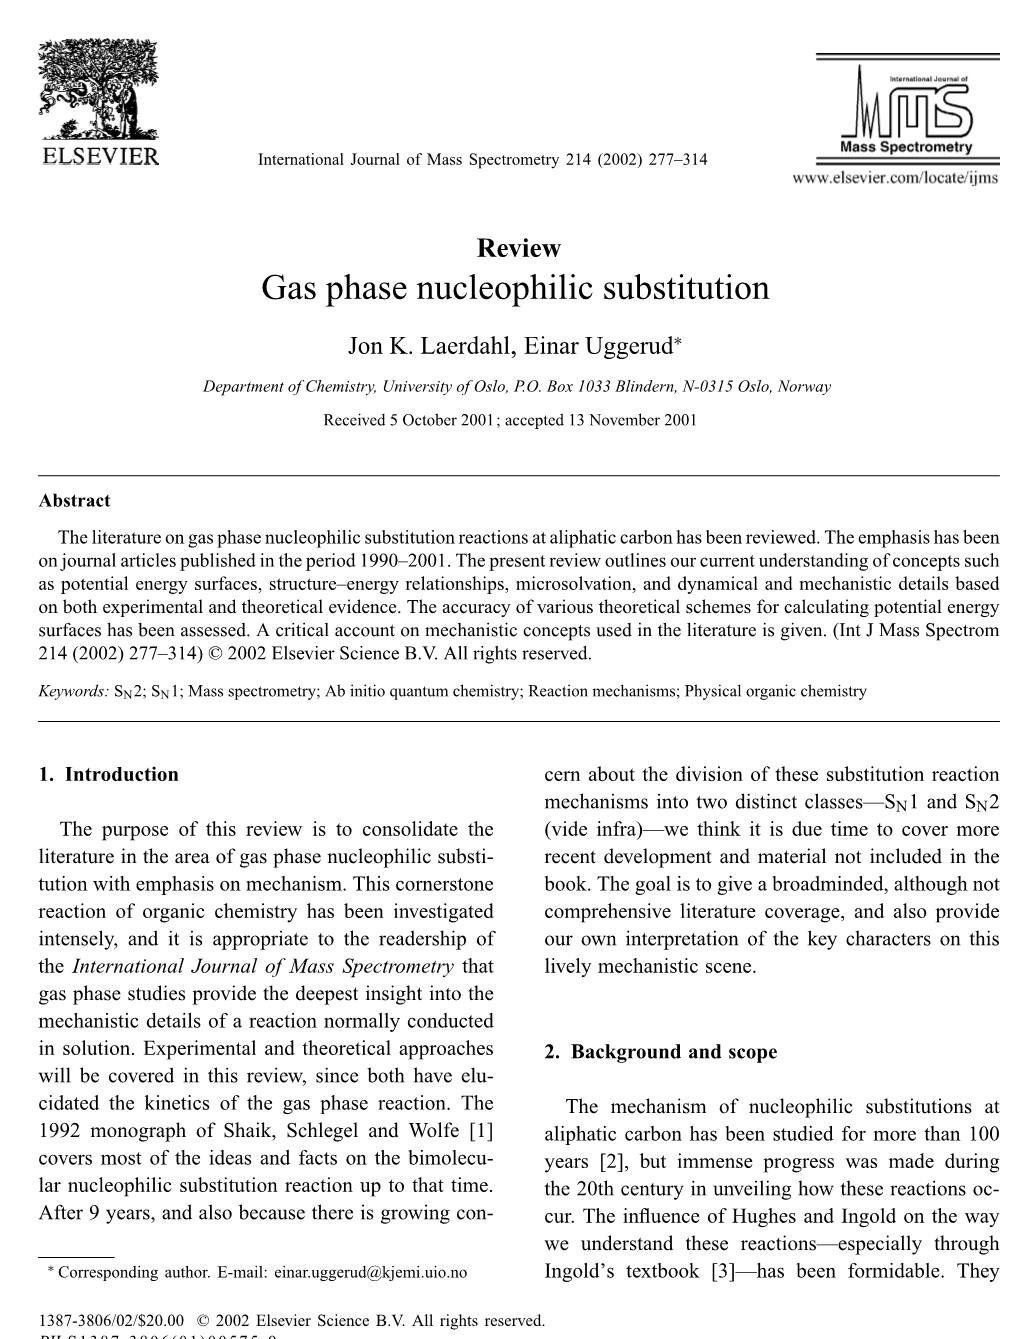 Gas Phase Nucleophilic Substitution